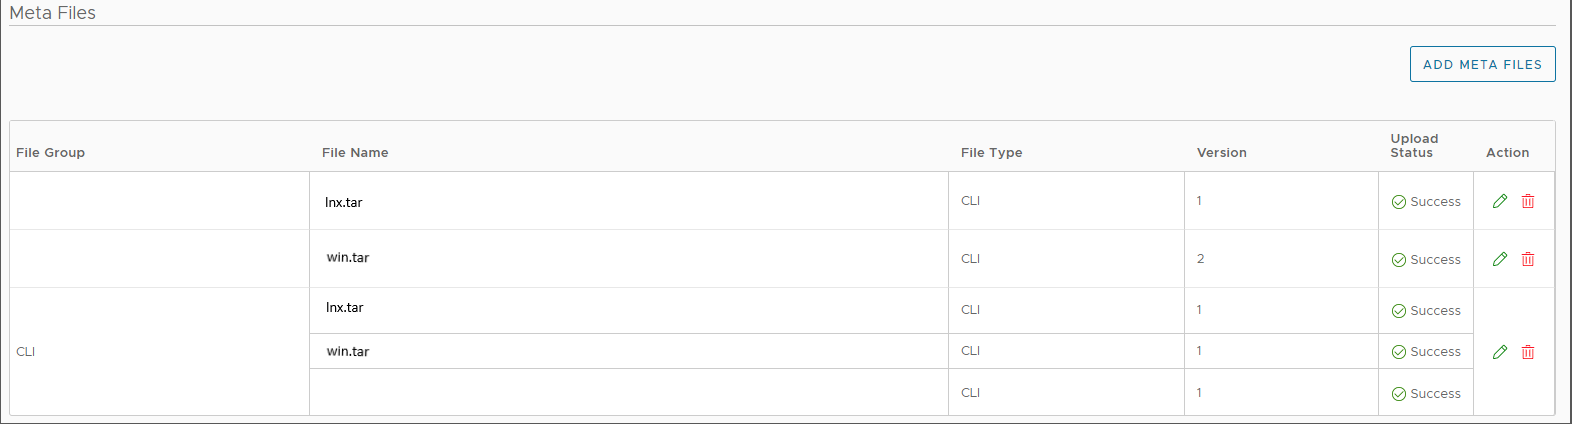 Add Meta Files option to upload the files required for deploying your solution